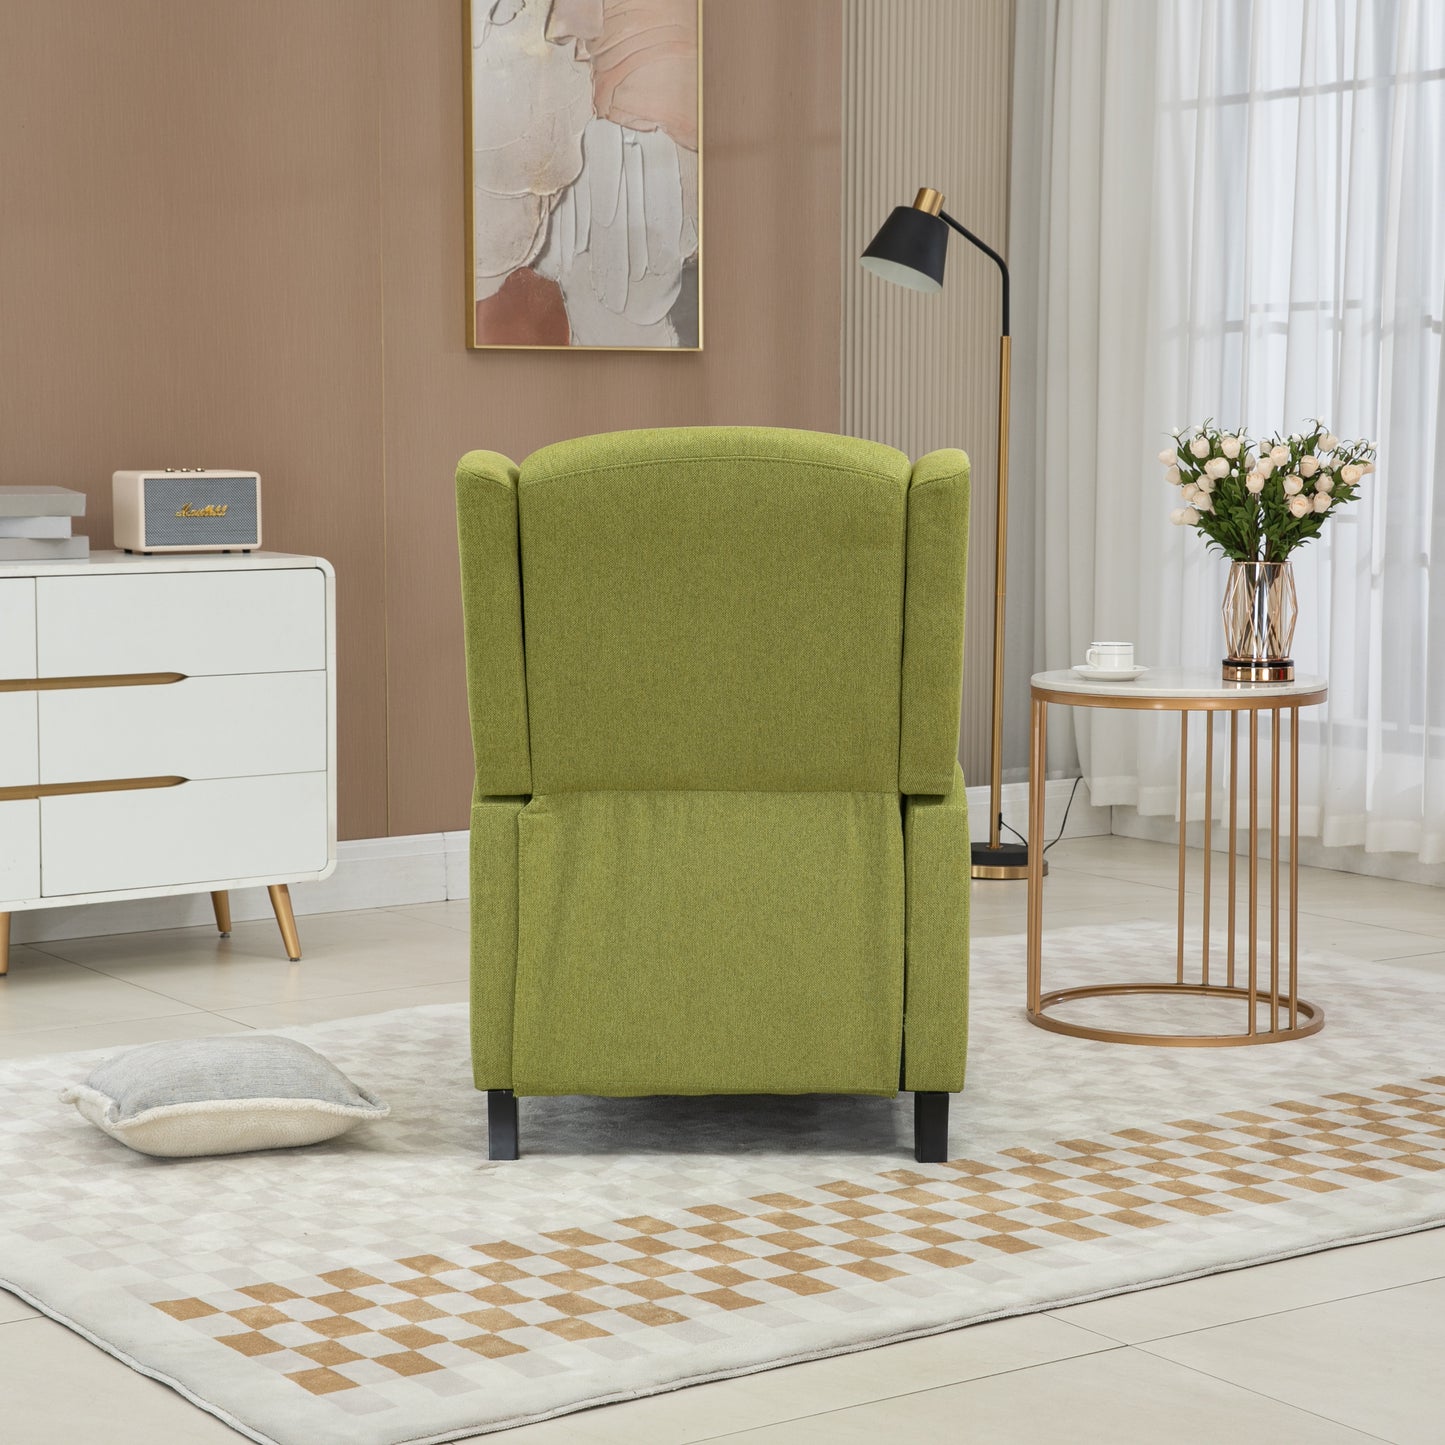 Modern Olive Green Upholstered Recliner Chair for Stylish Living Spaces